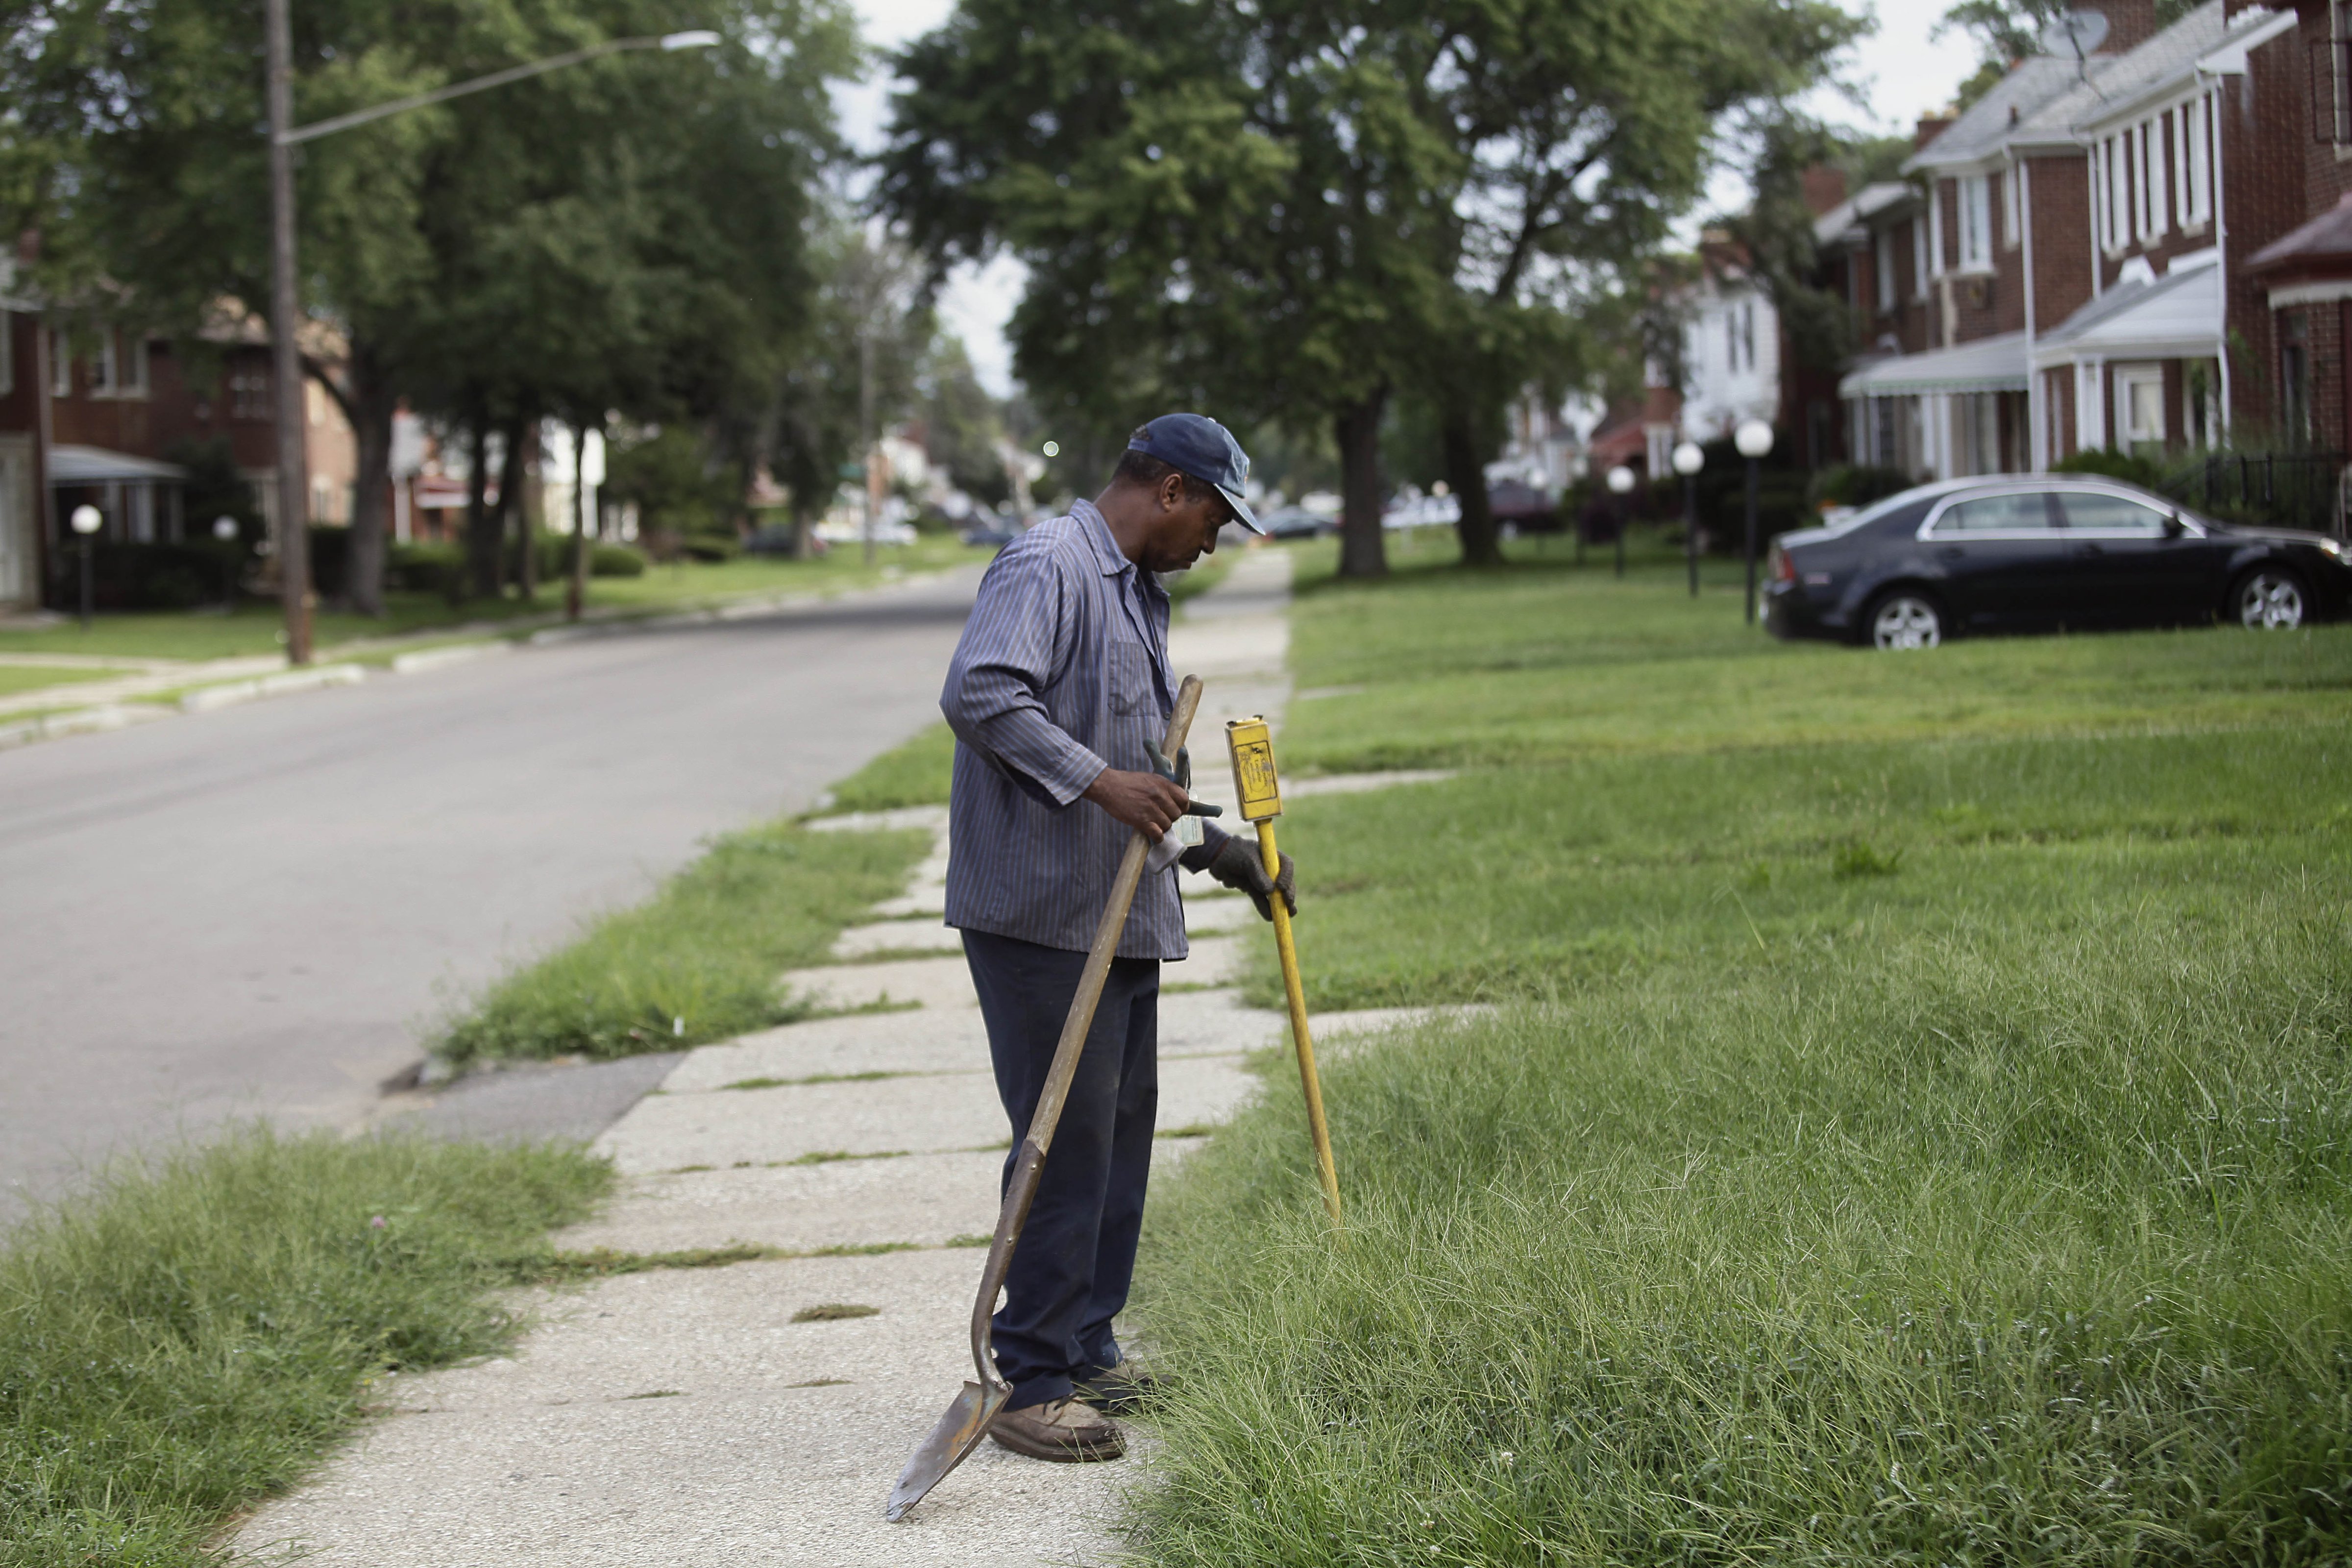 A worker from Homrich turns off water supply to a home August 27, 2014 in Detroit, Michigan. The Detroit Water and Sewer Department have disconnected water to thousands of Detroit residents who are delinquent with their bills. (Joshua Lott&mdash;Getty Images)